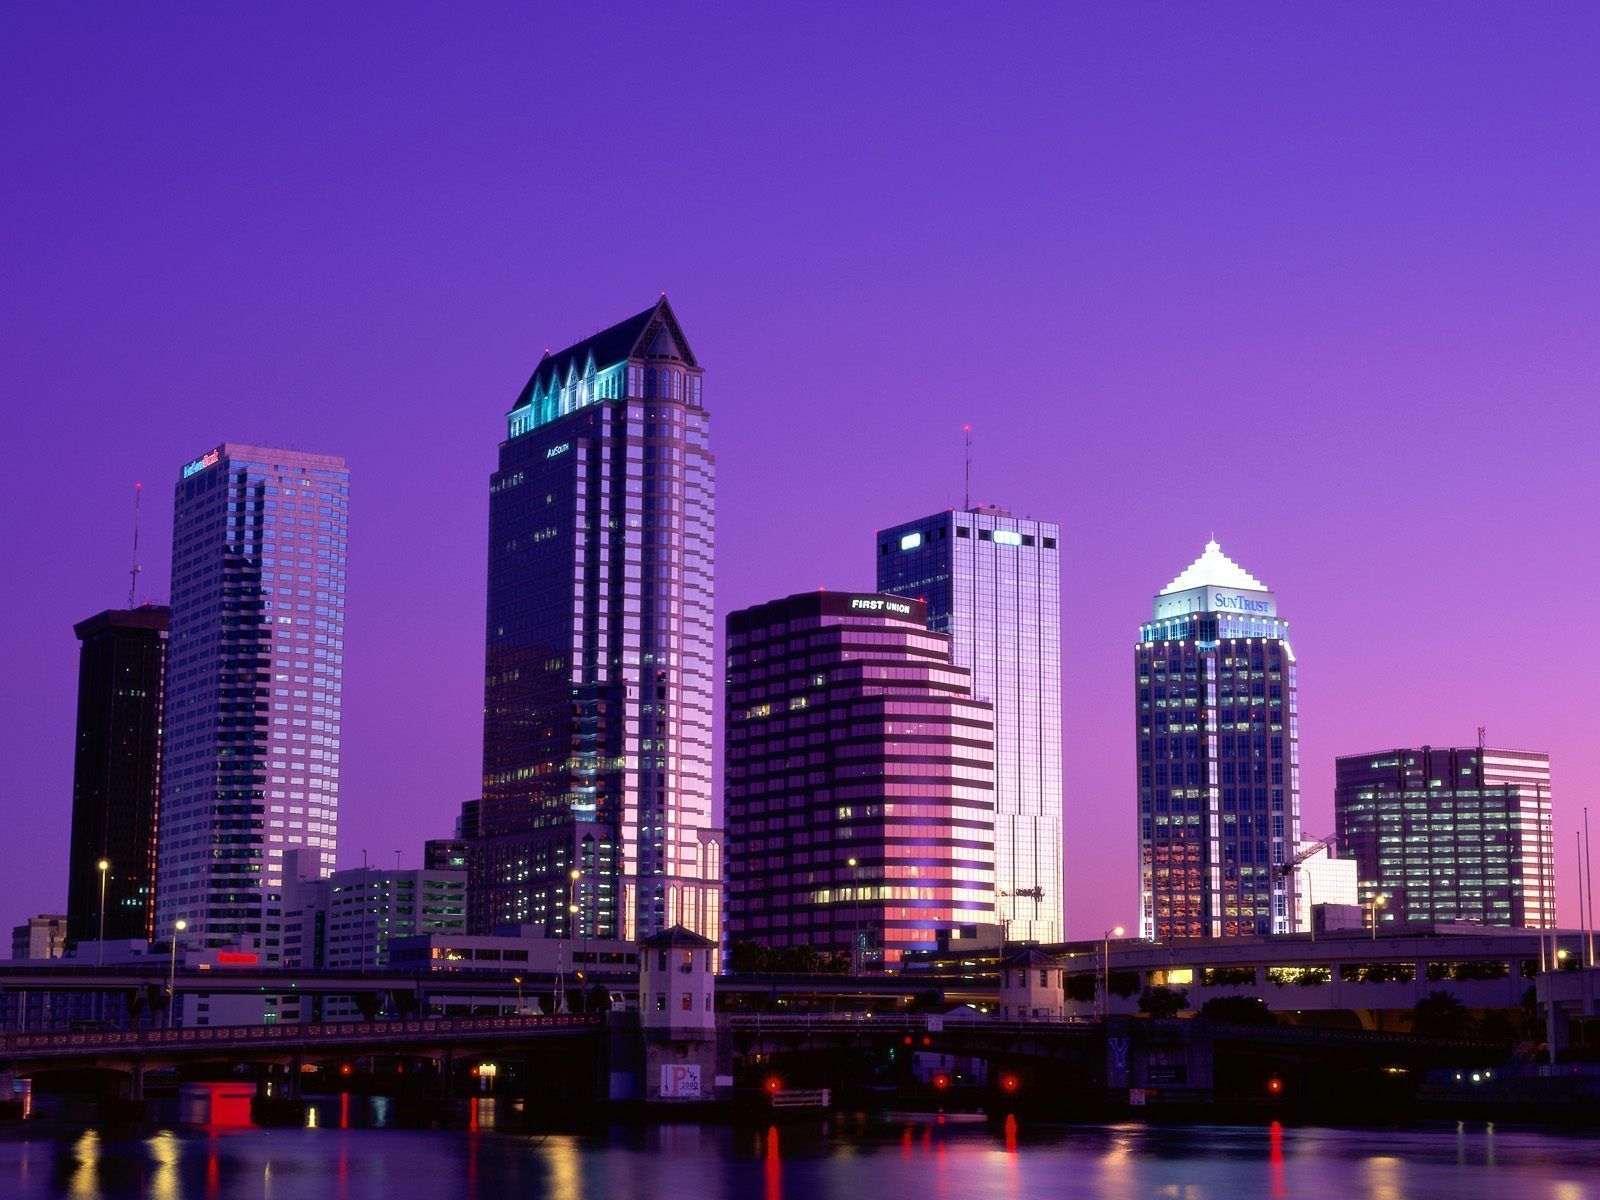 Tampa buildings by night, Florida - 1600x1200 - Wallpaper